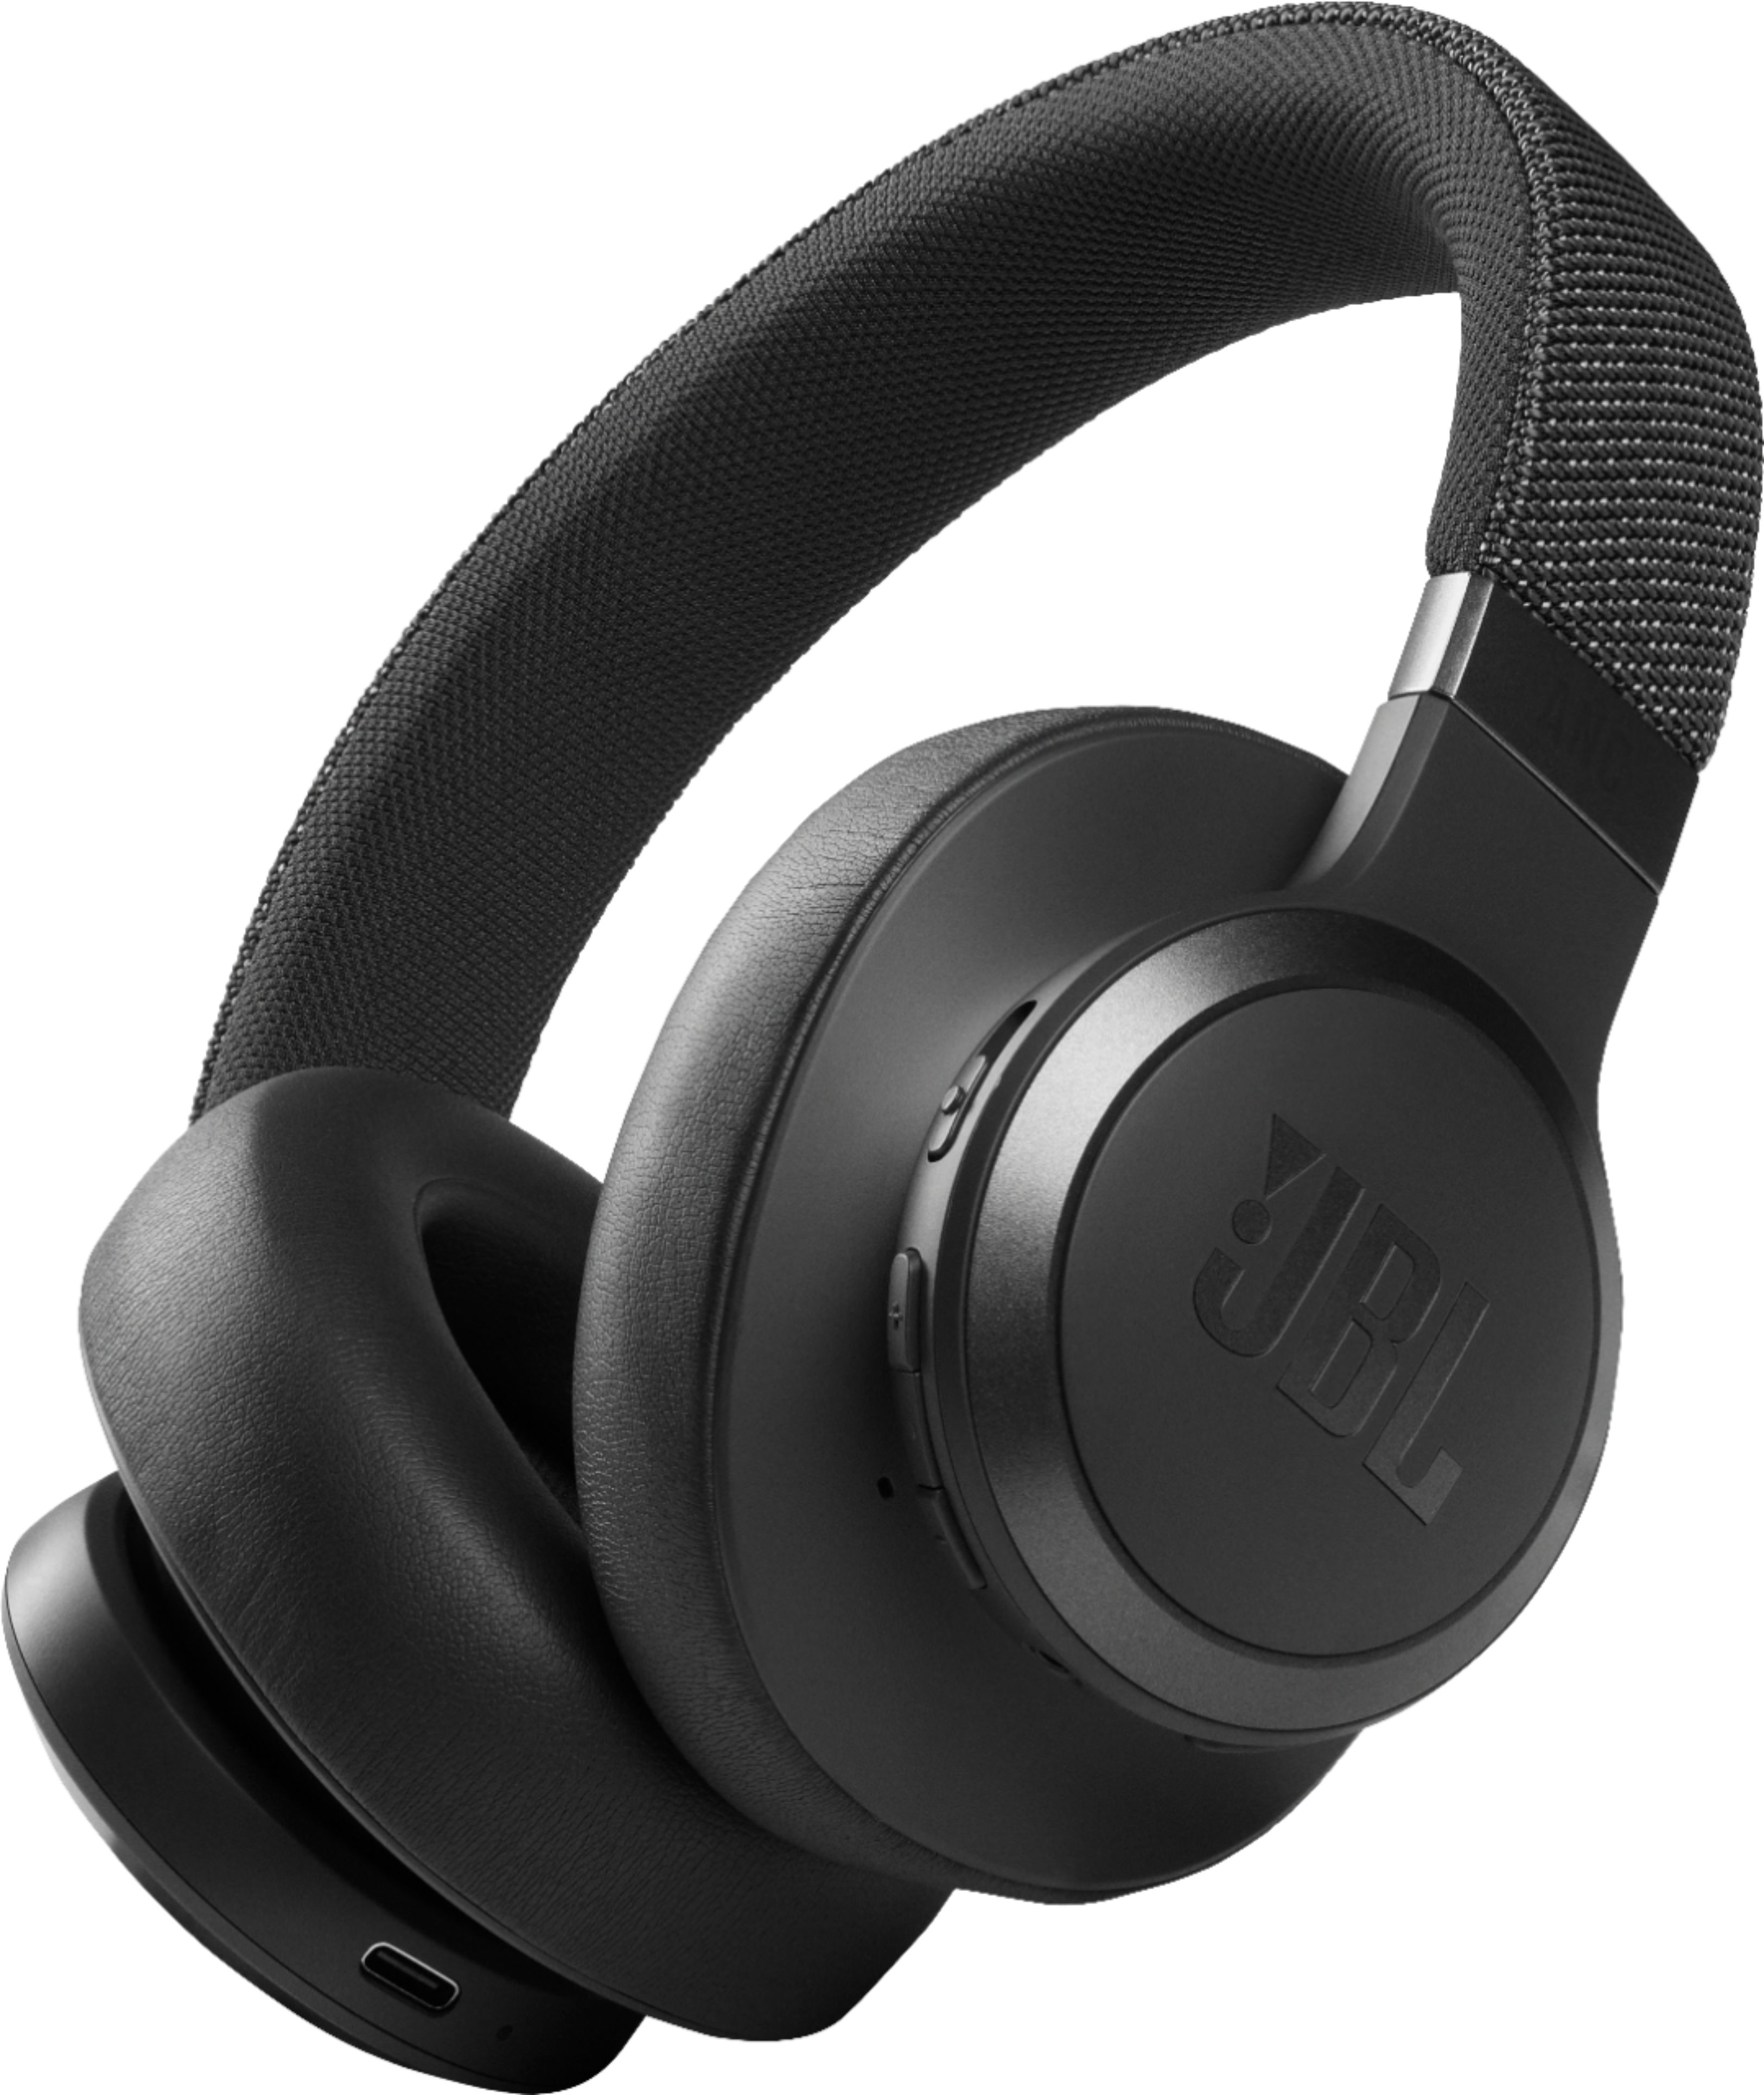 Angle View: JBL - Live 660NC Wireless Noise Cancelling Over-The-Ear Headphones - Black